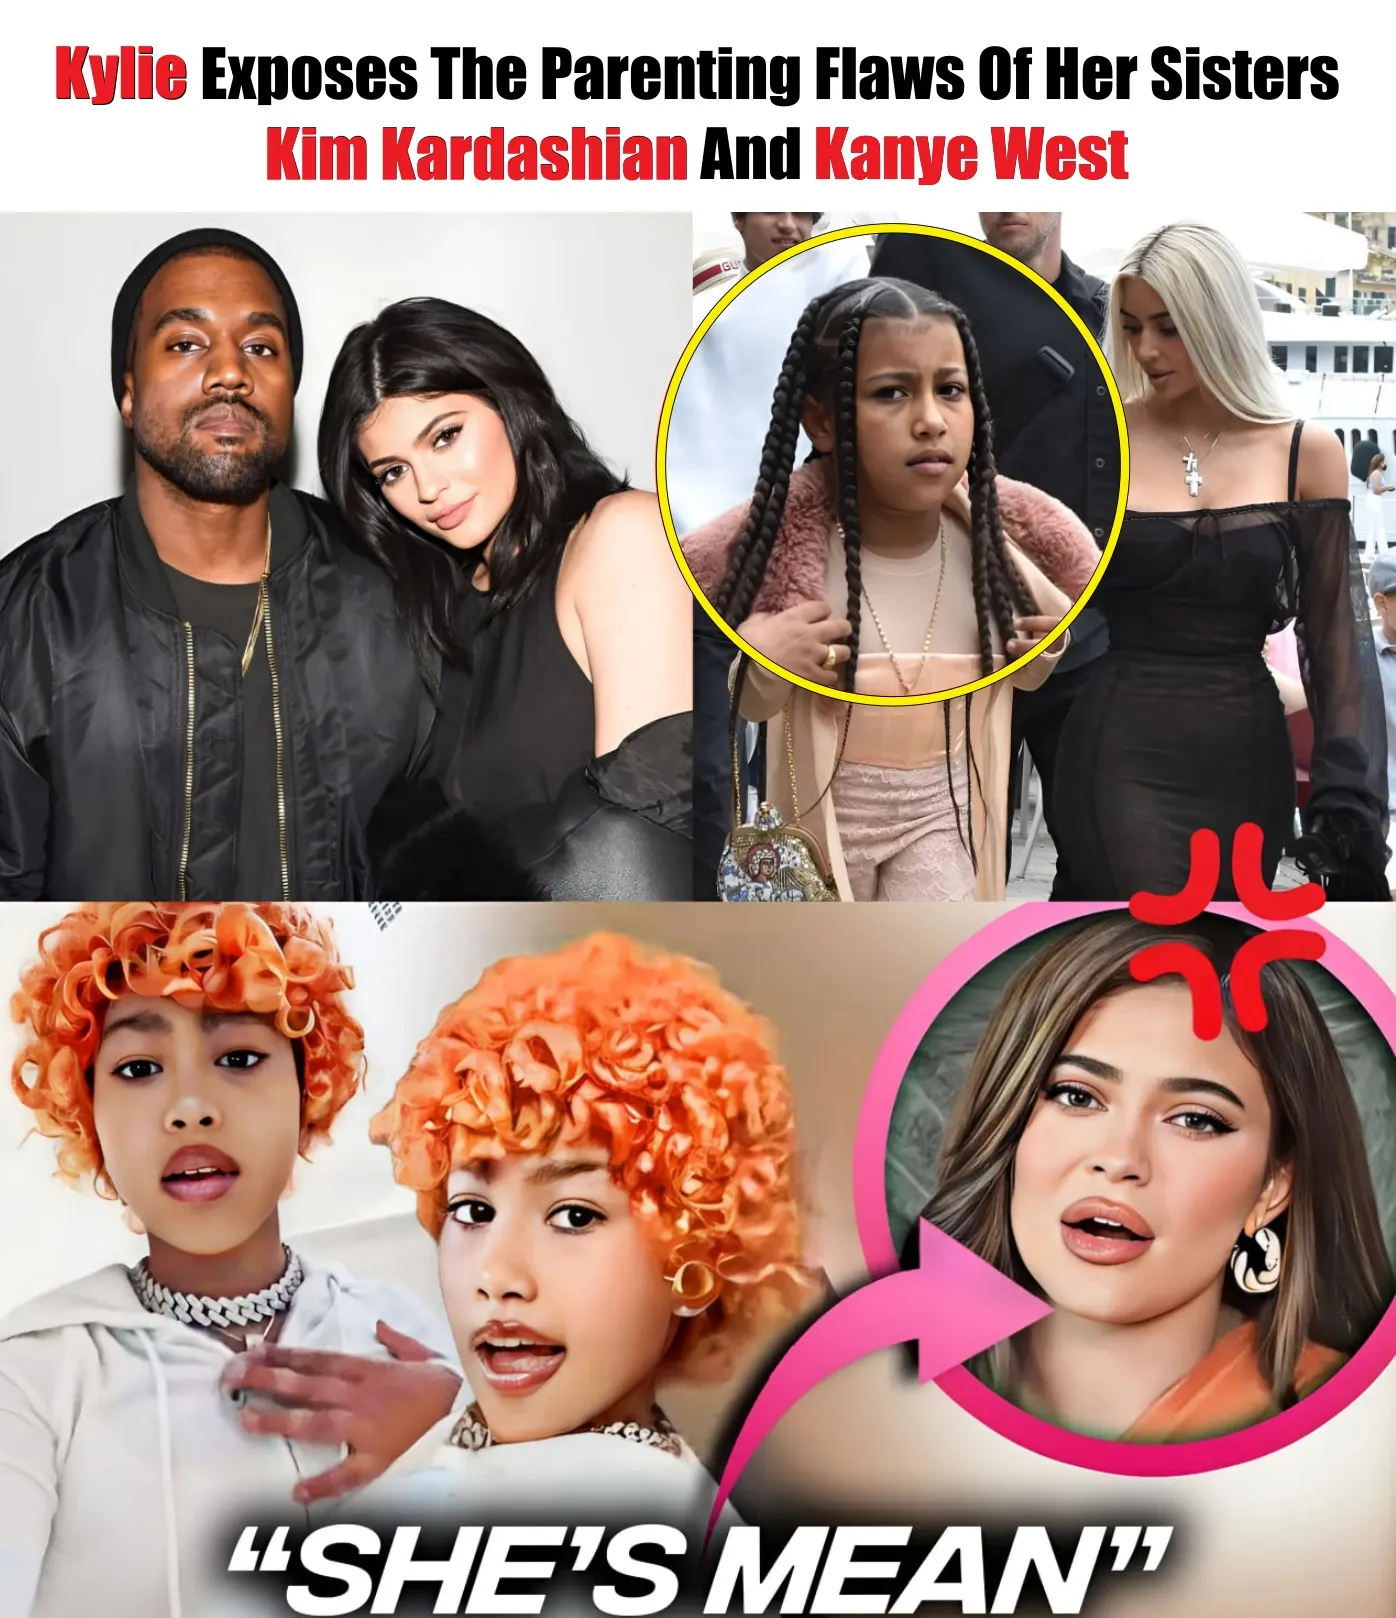 Cover Image for Kylie Exposes The Parenting Flaws Of Her Sisters Kim Kardashian And Kanye West !!